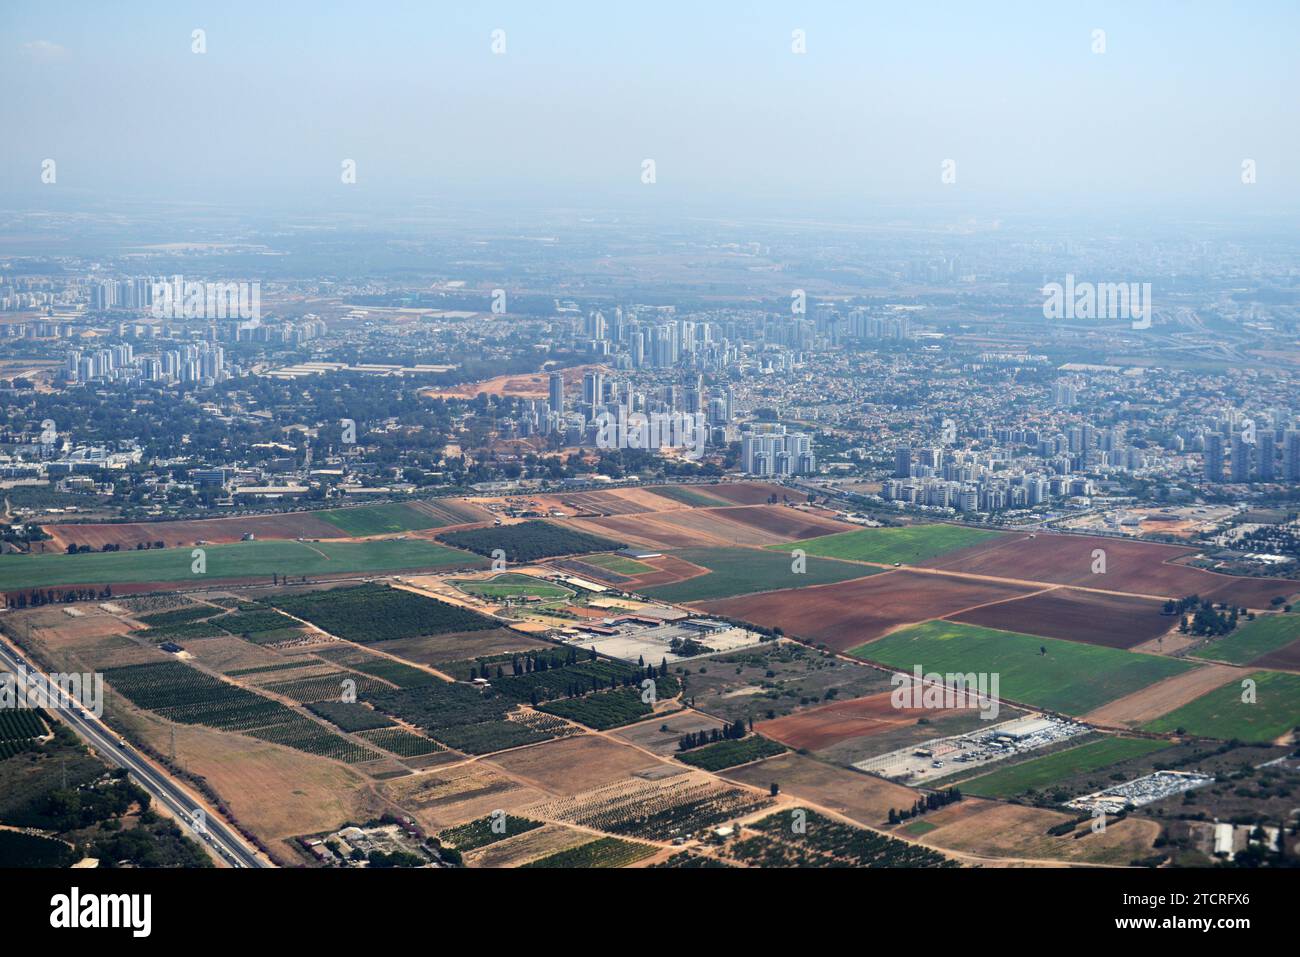 Aerial view of agriculture land and the highways in the Shfela region in Israel. Stock Photo